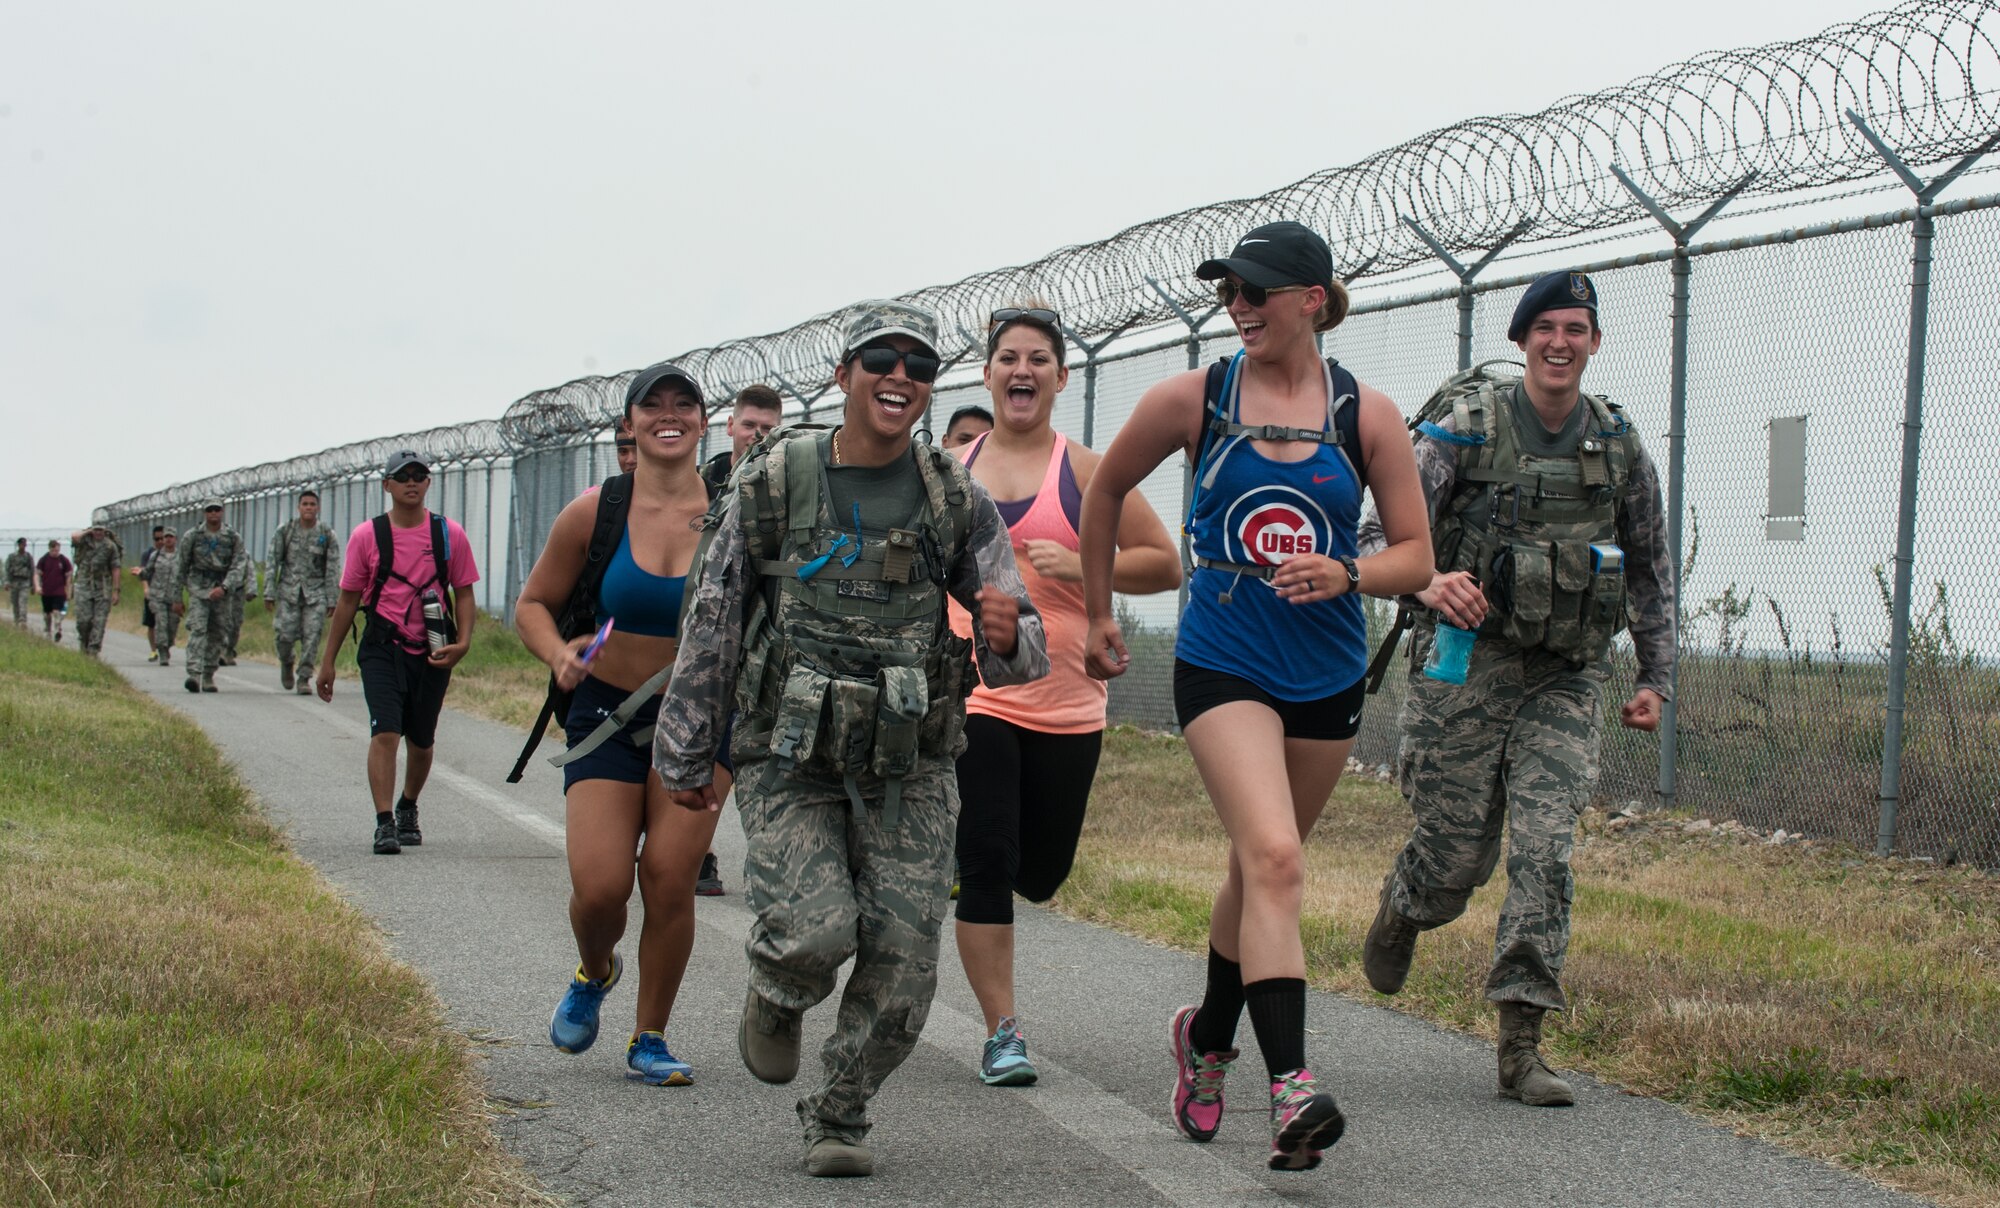 Airmen from the 8th Fighter Wing partake in a six-mile ruck march as part of 9-11 Remembrance Day at Kunsan Air Base, Republic of Korea, Sept. 11, 2015. The day's events also included a first-responder stair climb and a 9-11 Remembrance Day Ceremony. (U.S. Air Force photo by Staff Sgt. Nick Wilson/Released)